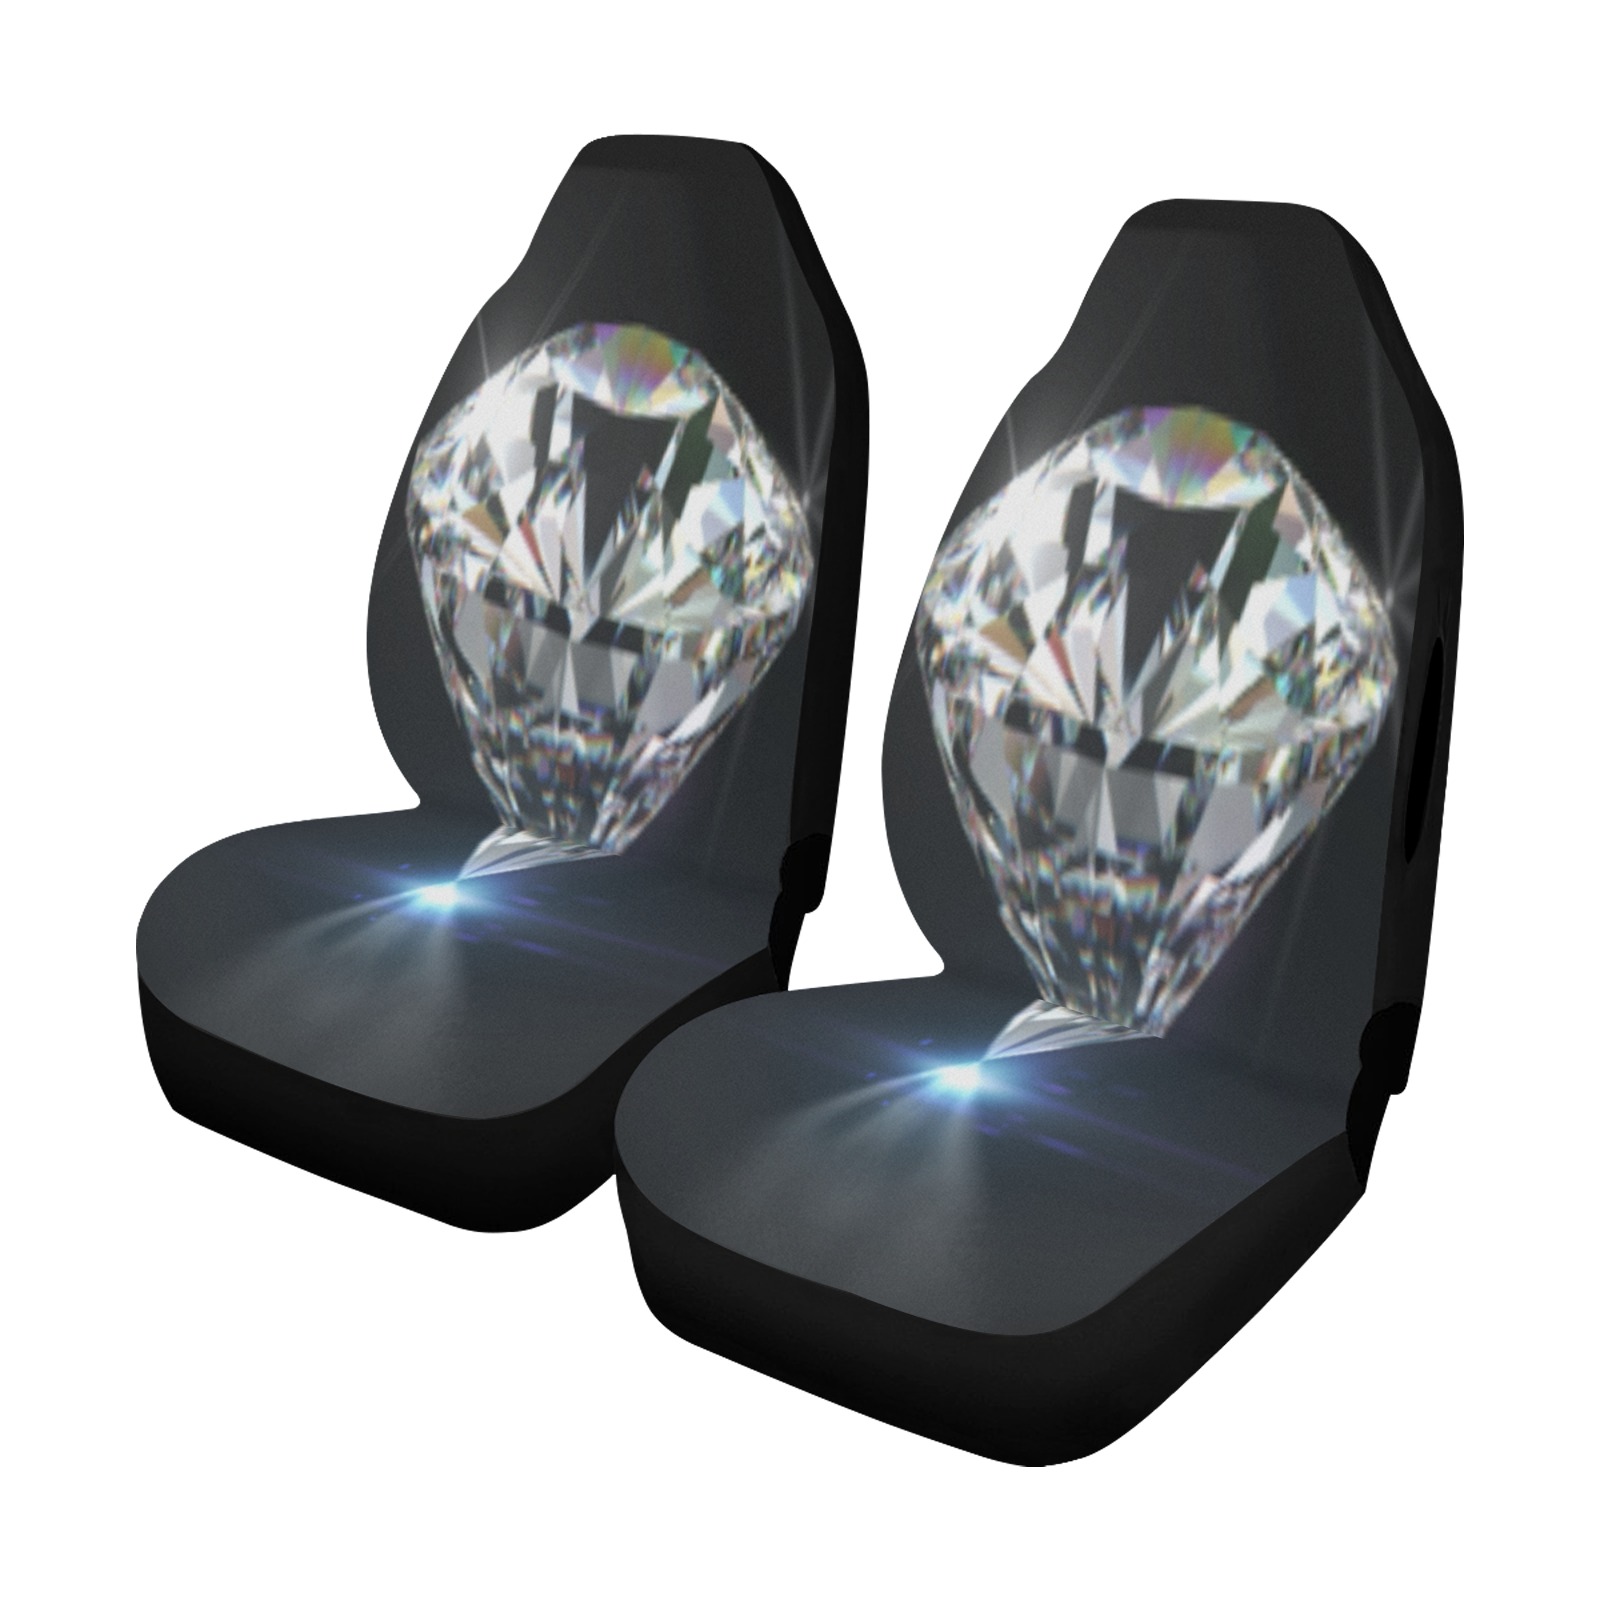 diamond Car Seat Cover Airbag Compatible (Set of 2)